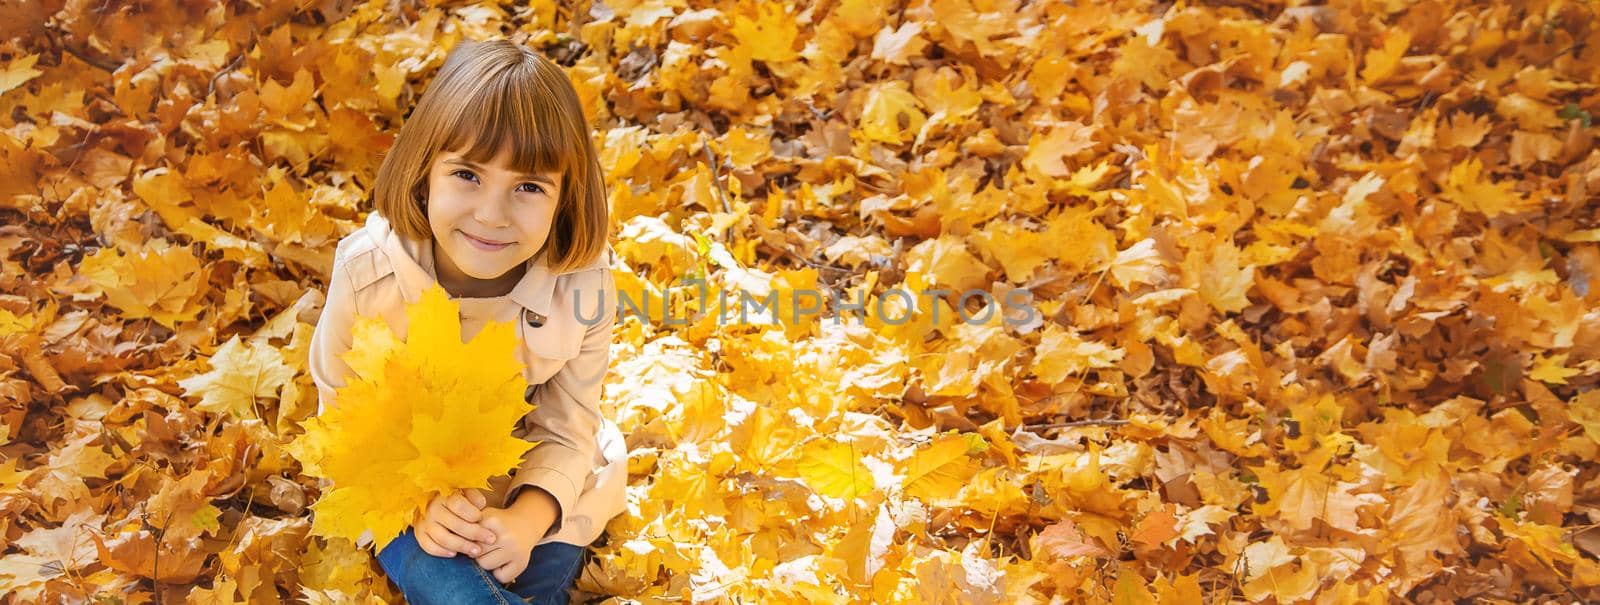 Children in the park with autumn leaves. Selective focus. by yanadjana